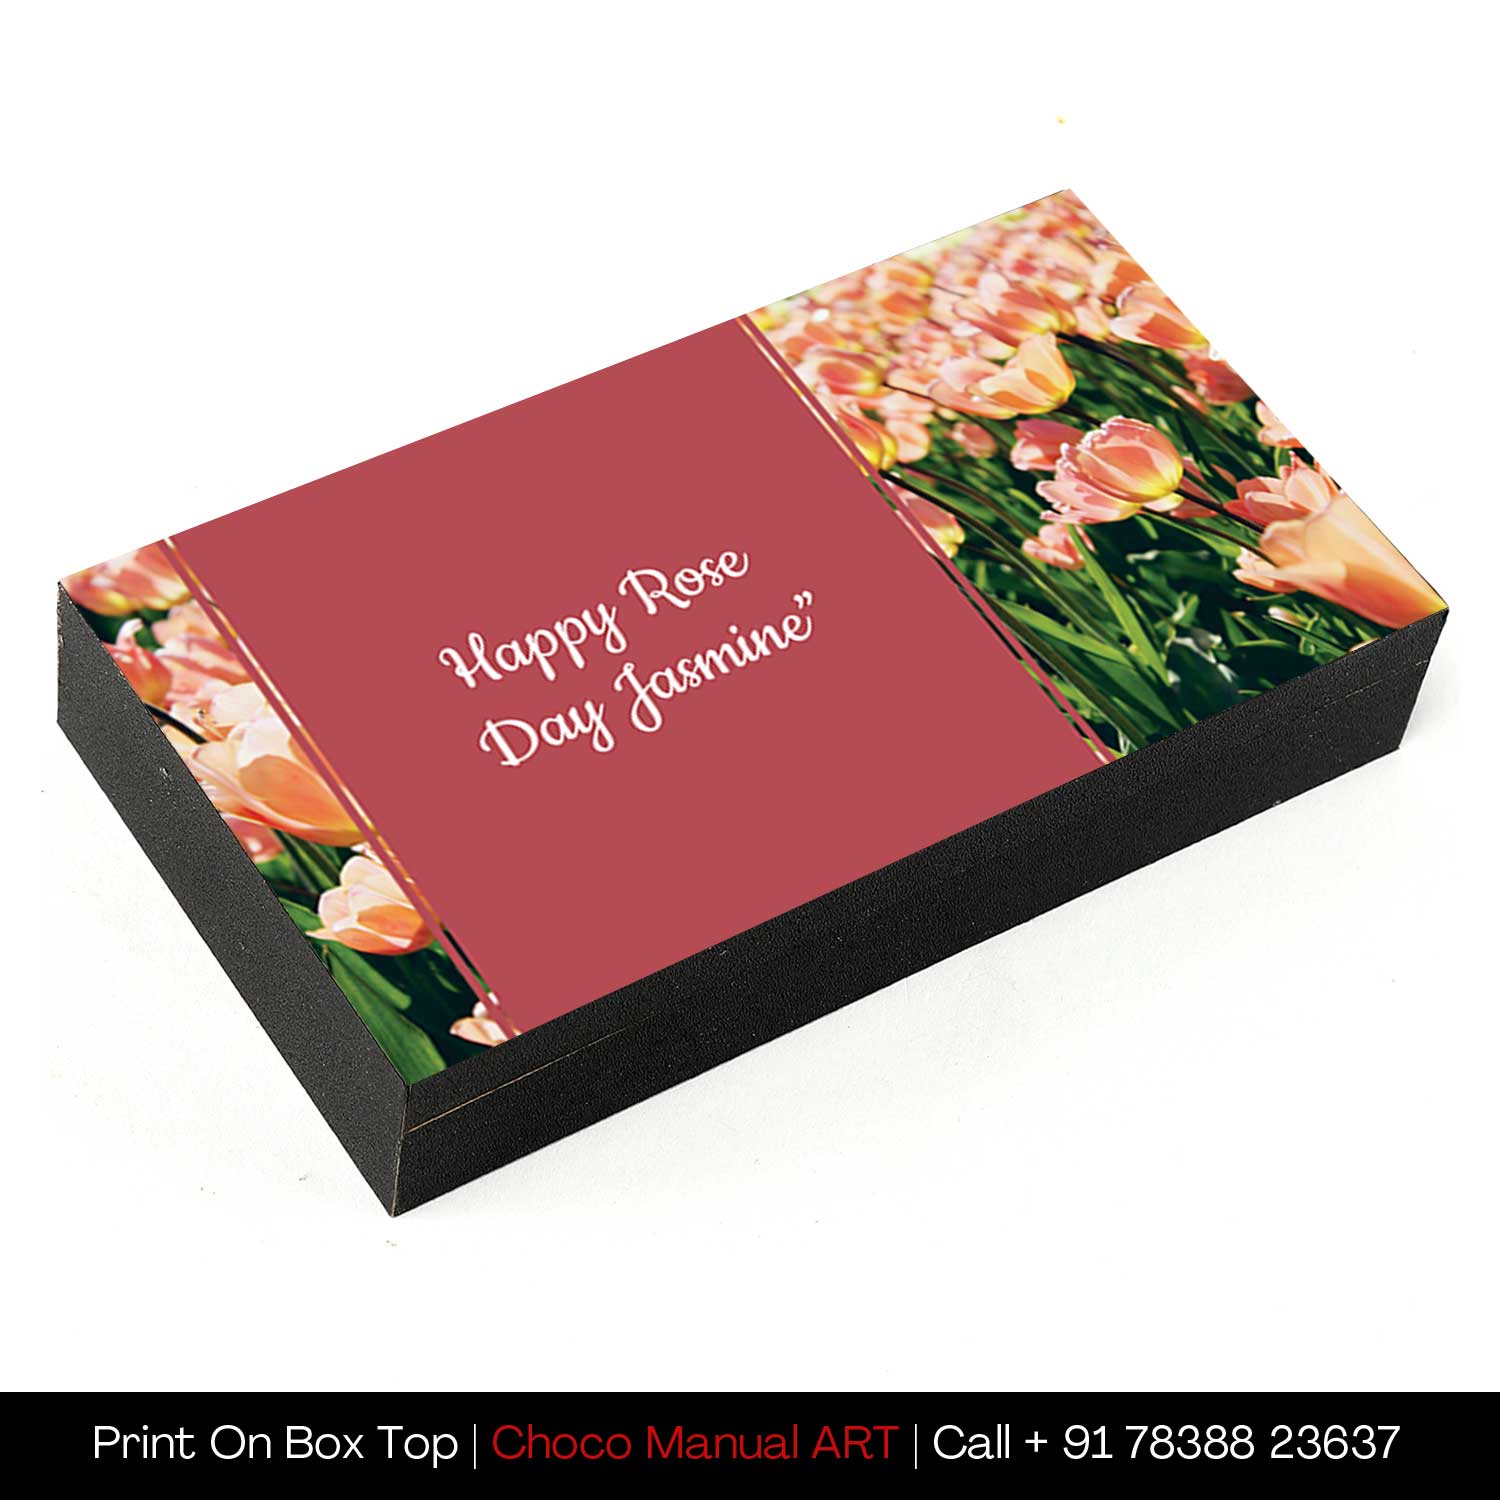 Best Rose Day image/name printed gift for friend